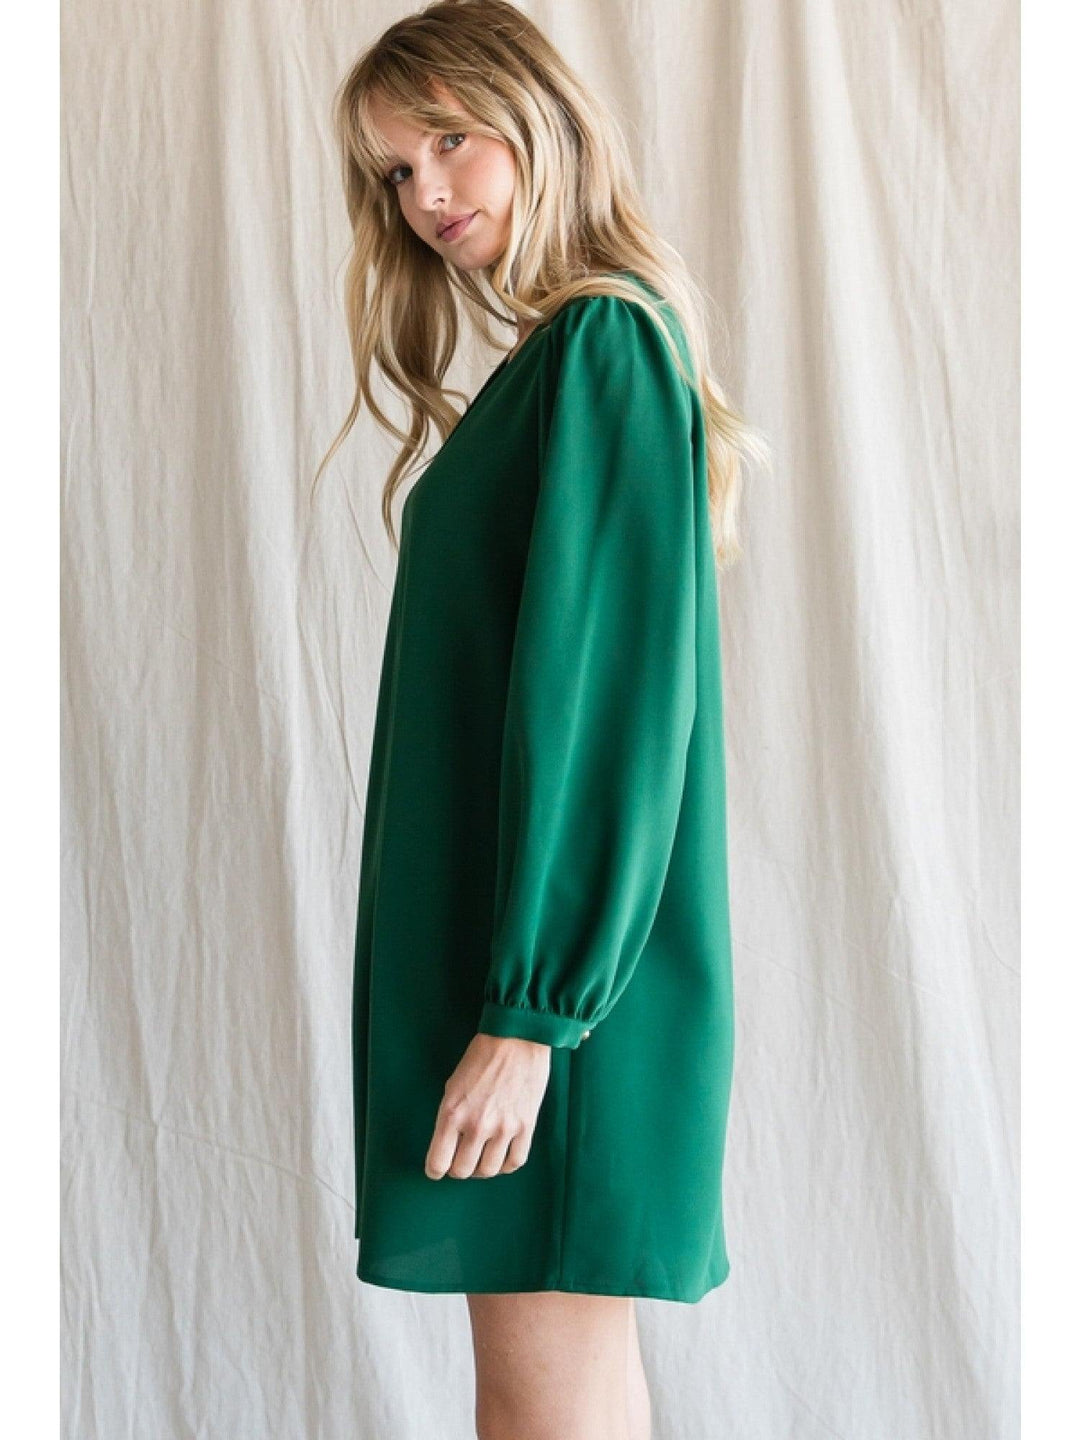 gift boutique with dresses houston texas tres chic green long sleeve a line